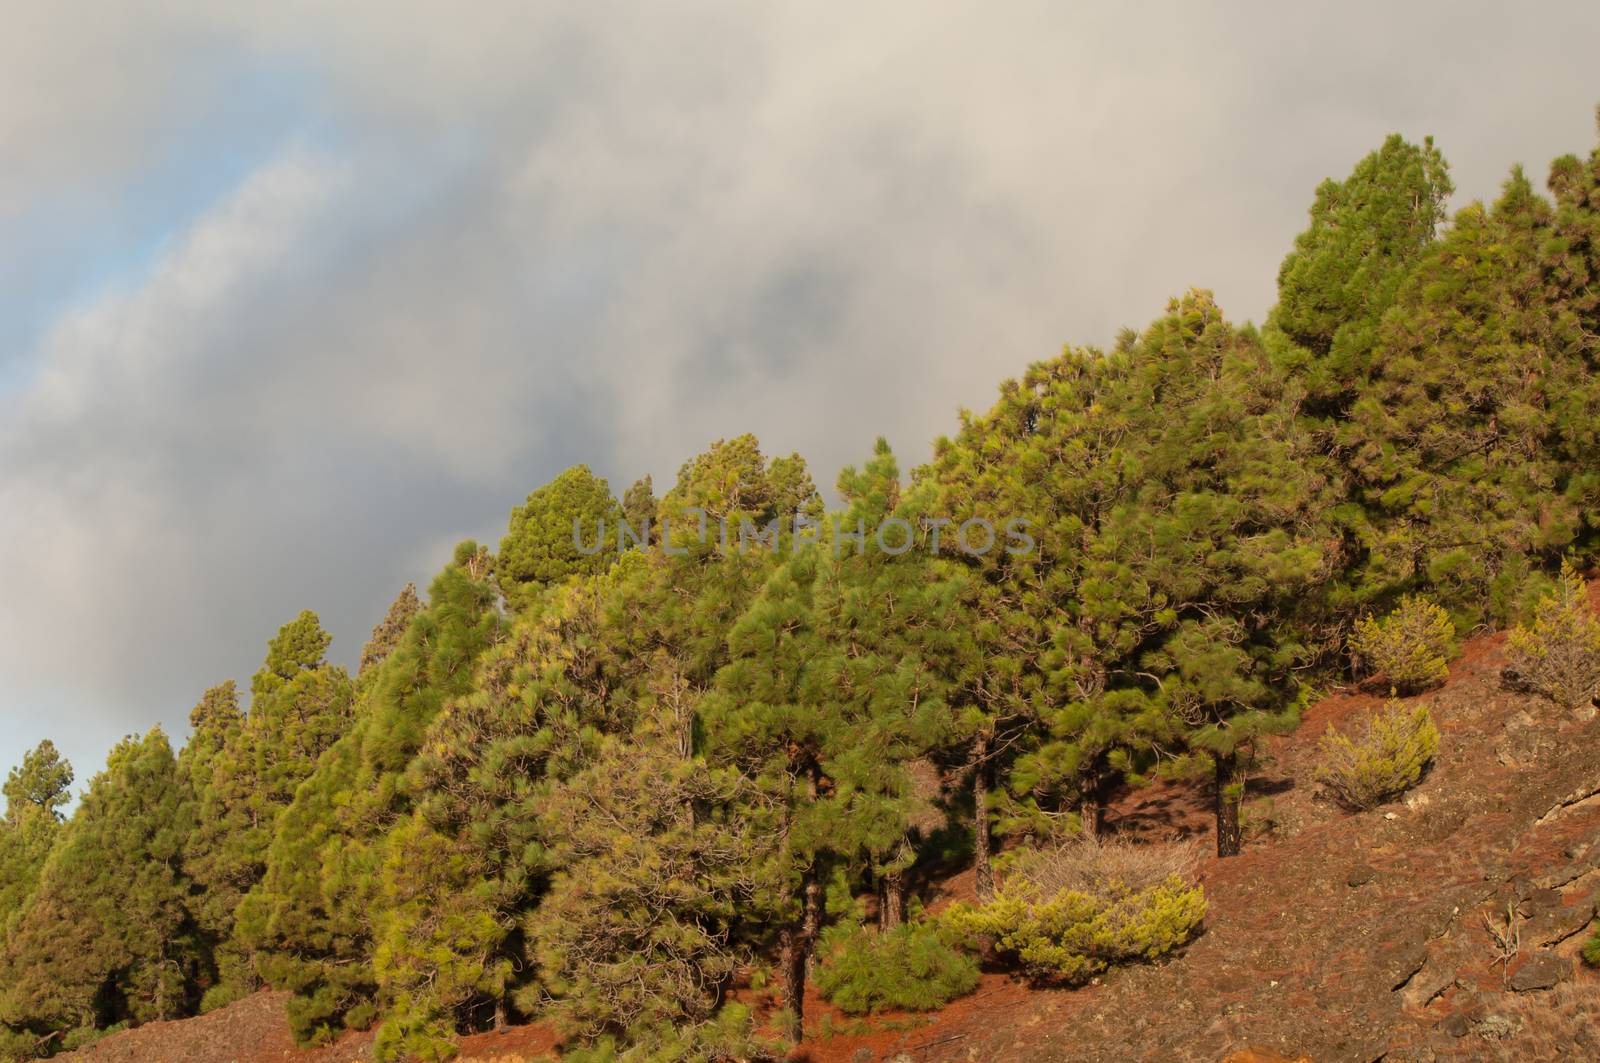 Forest of Canary Island pine. by VictorSuarez